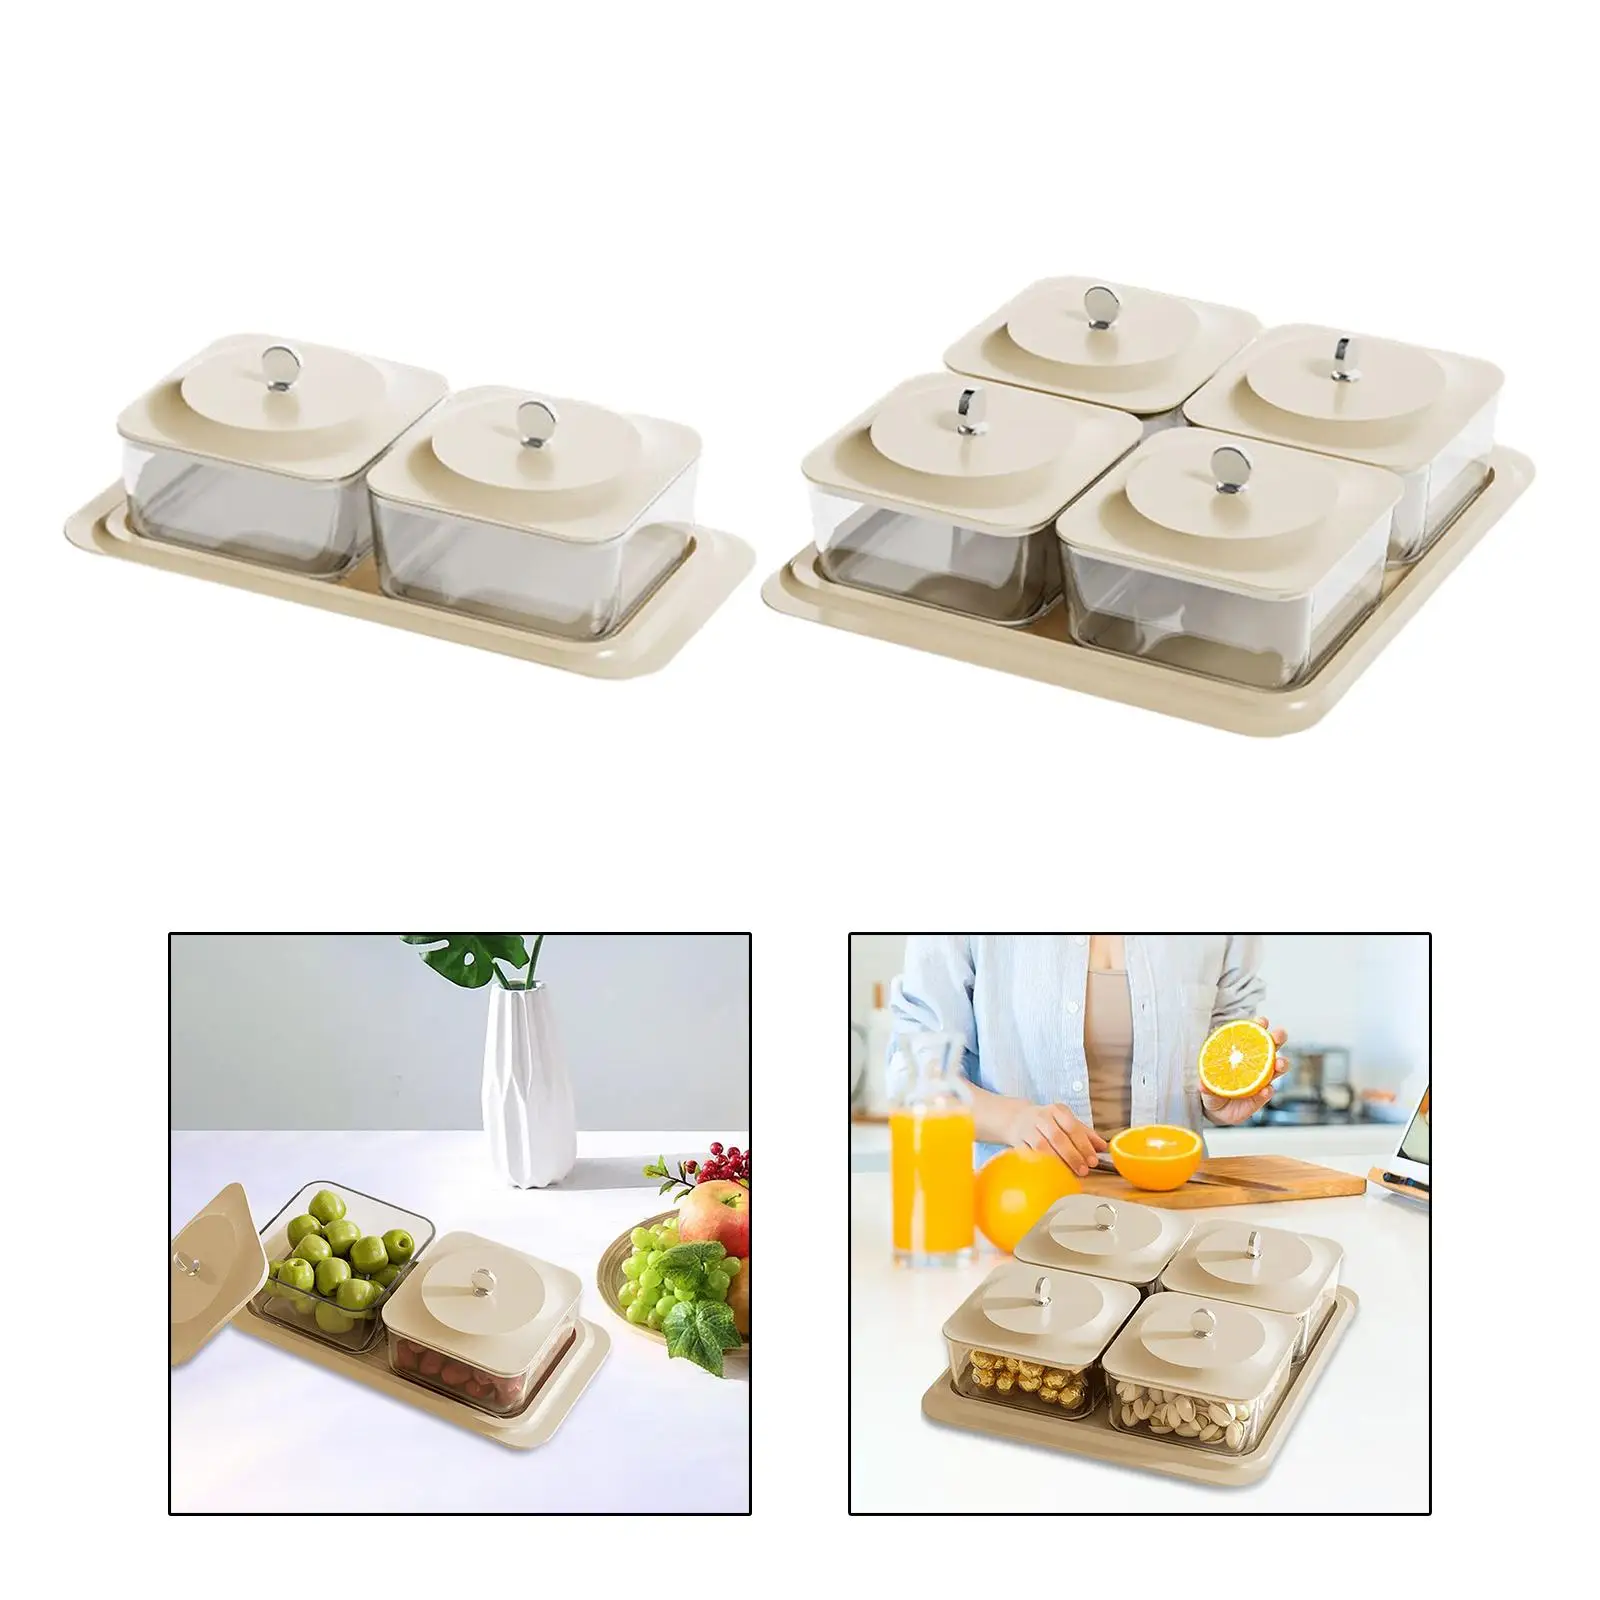 Divided Serving Dishes Organizer Decorative Easy to Refill Appetizer Platter for Entertaining Events Gatherings Holidays Parties